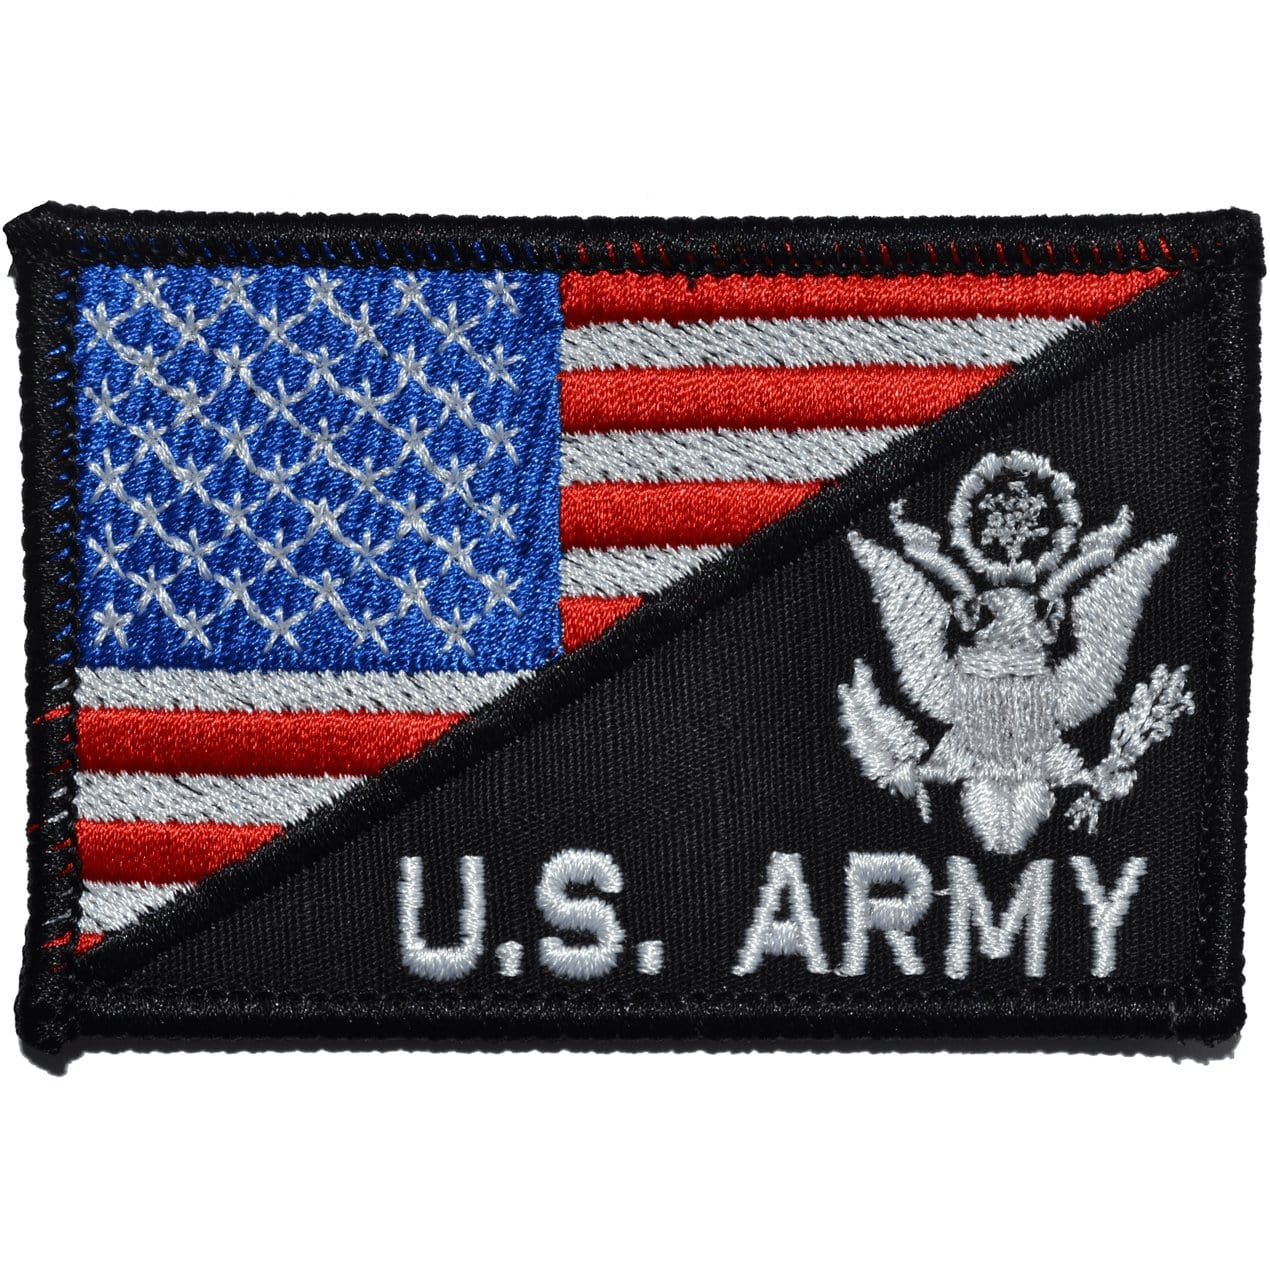 Tactical Gear Junkie Patches Full Color US Army Crest With Text USA Flag - 2.25x3.5 Patch